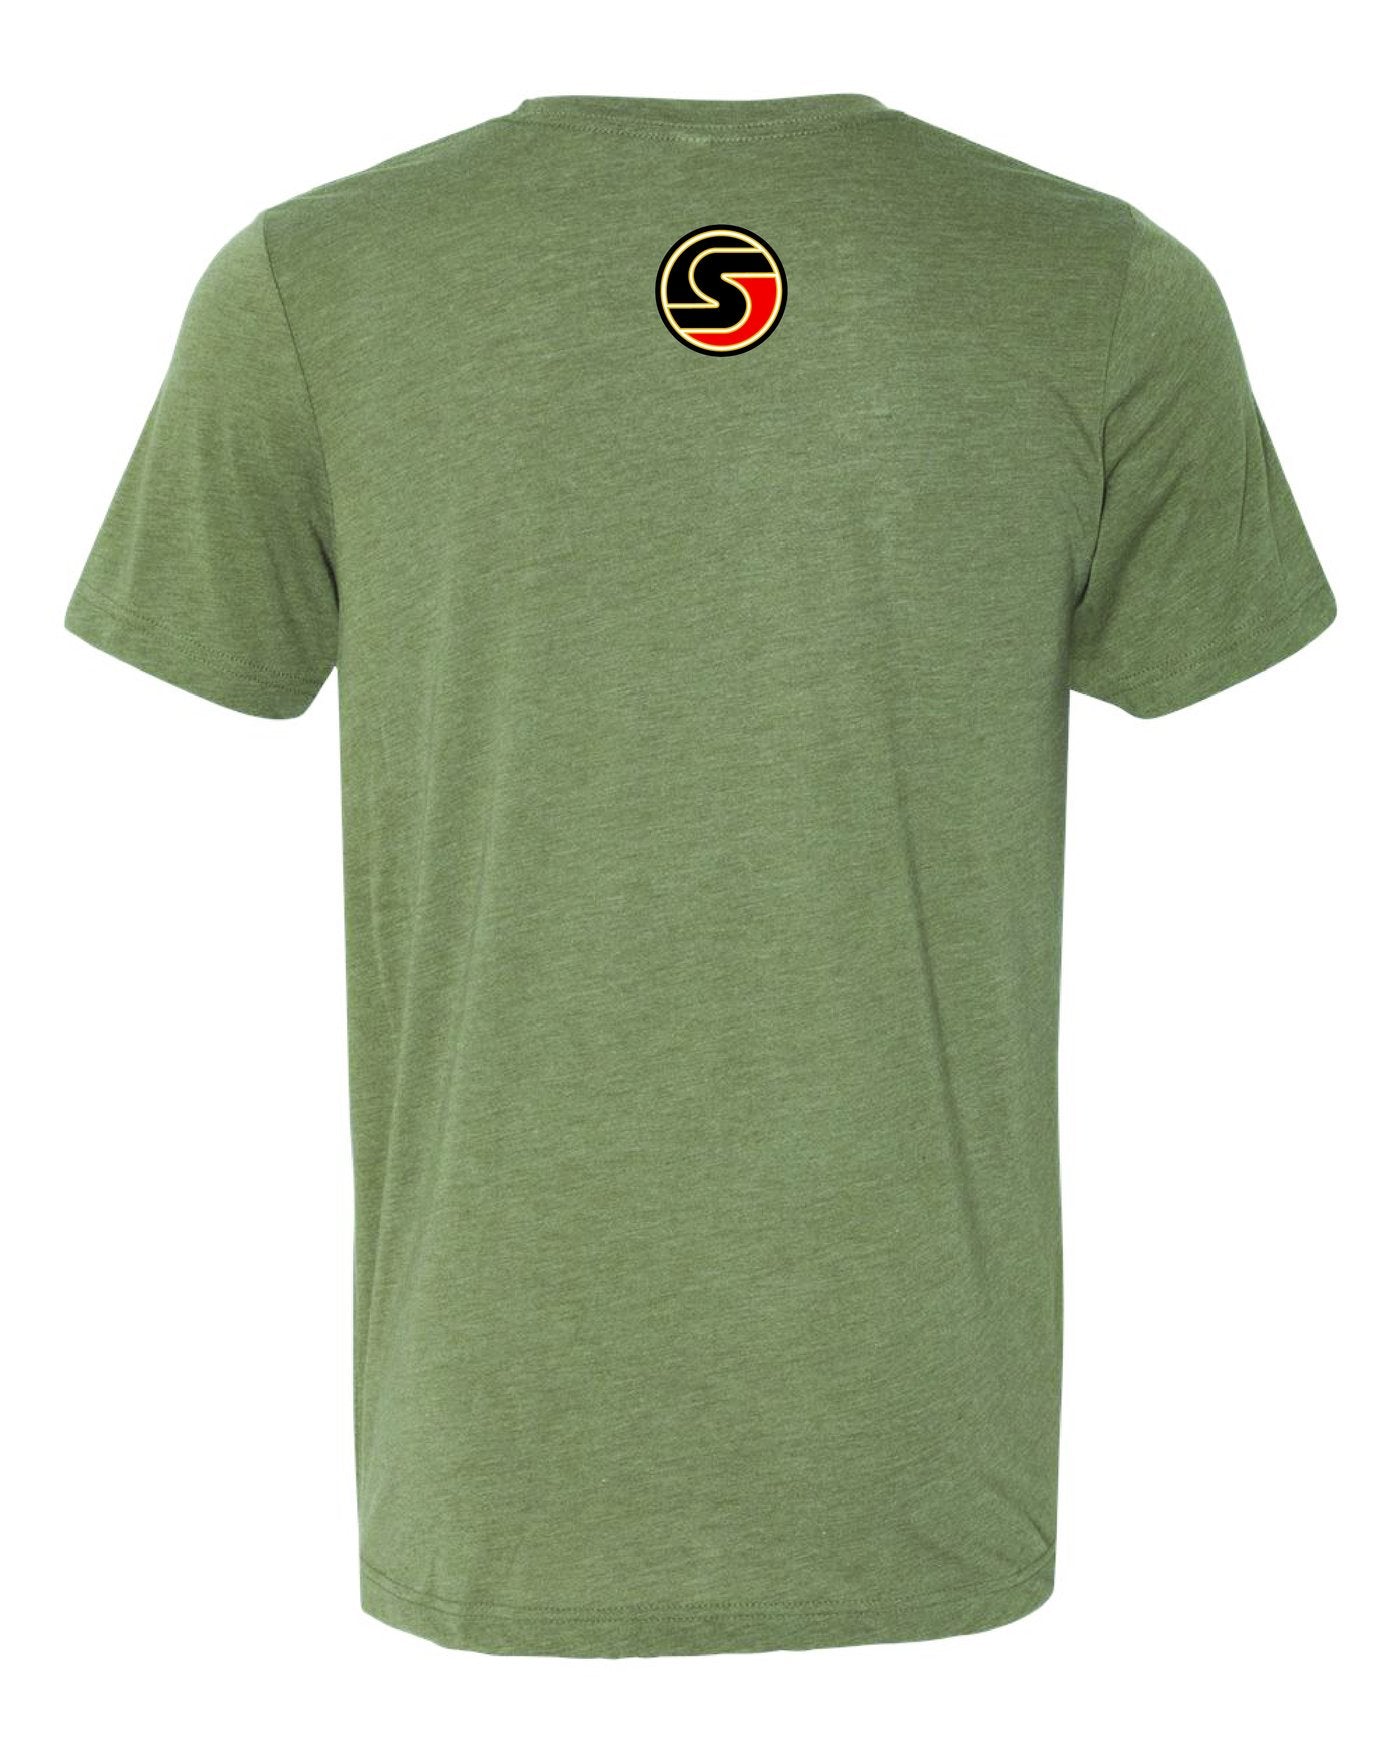 THE DOMINATOR TEE IN HEATHERED OLIVE